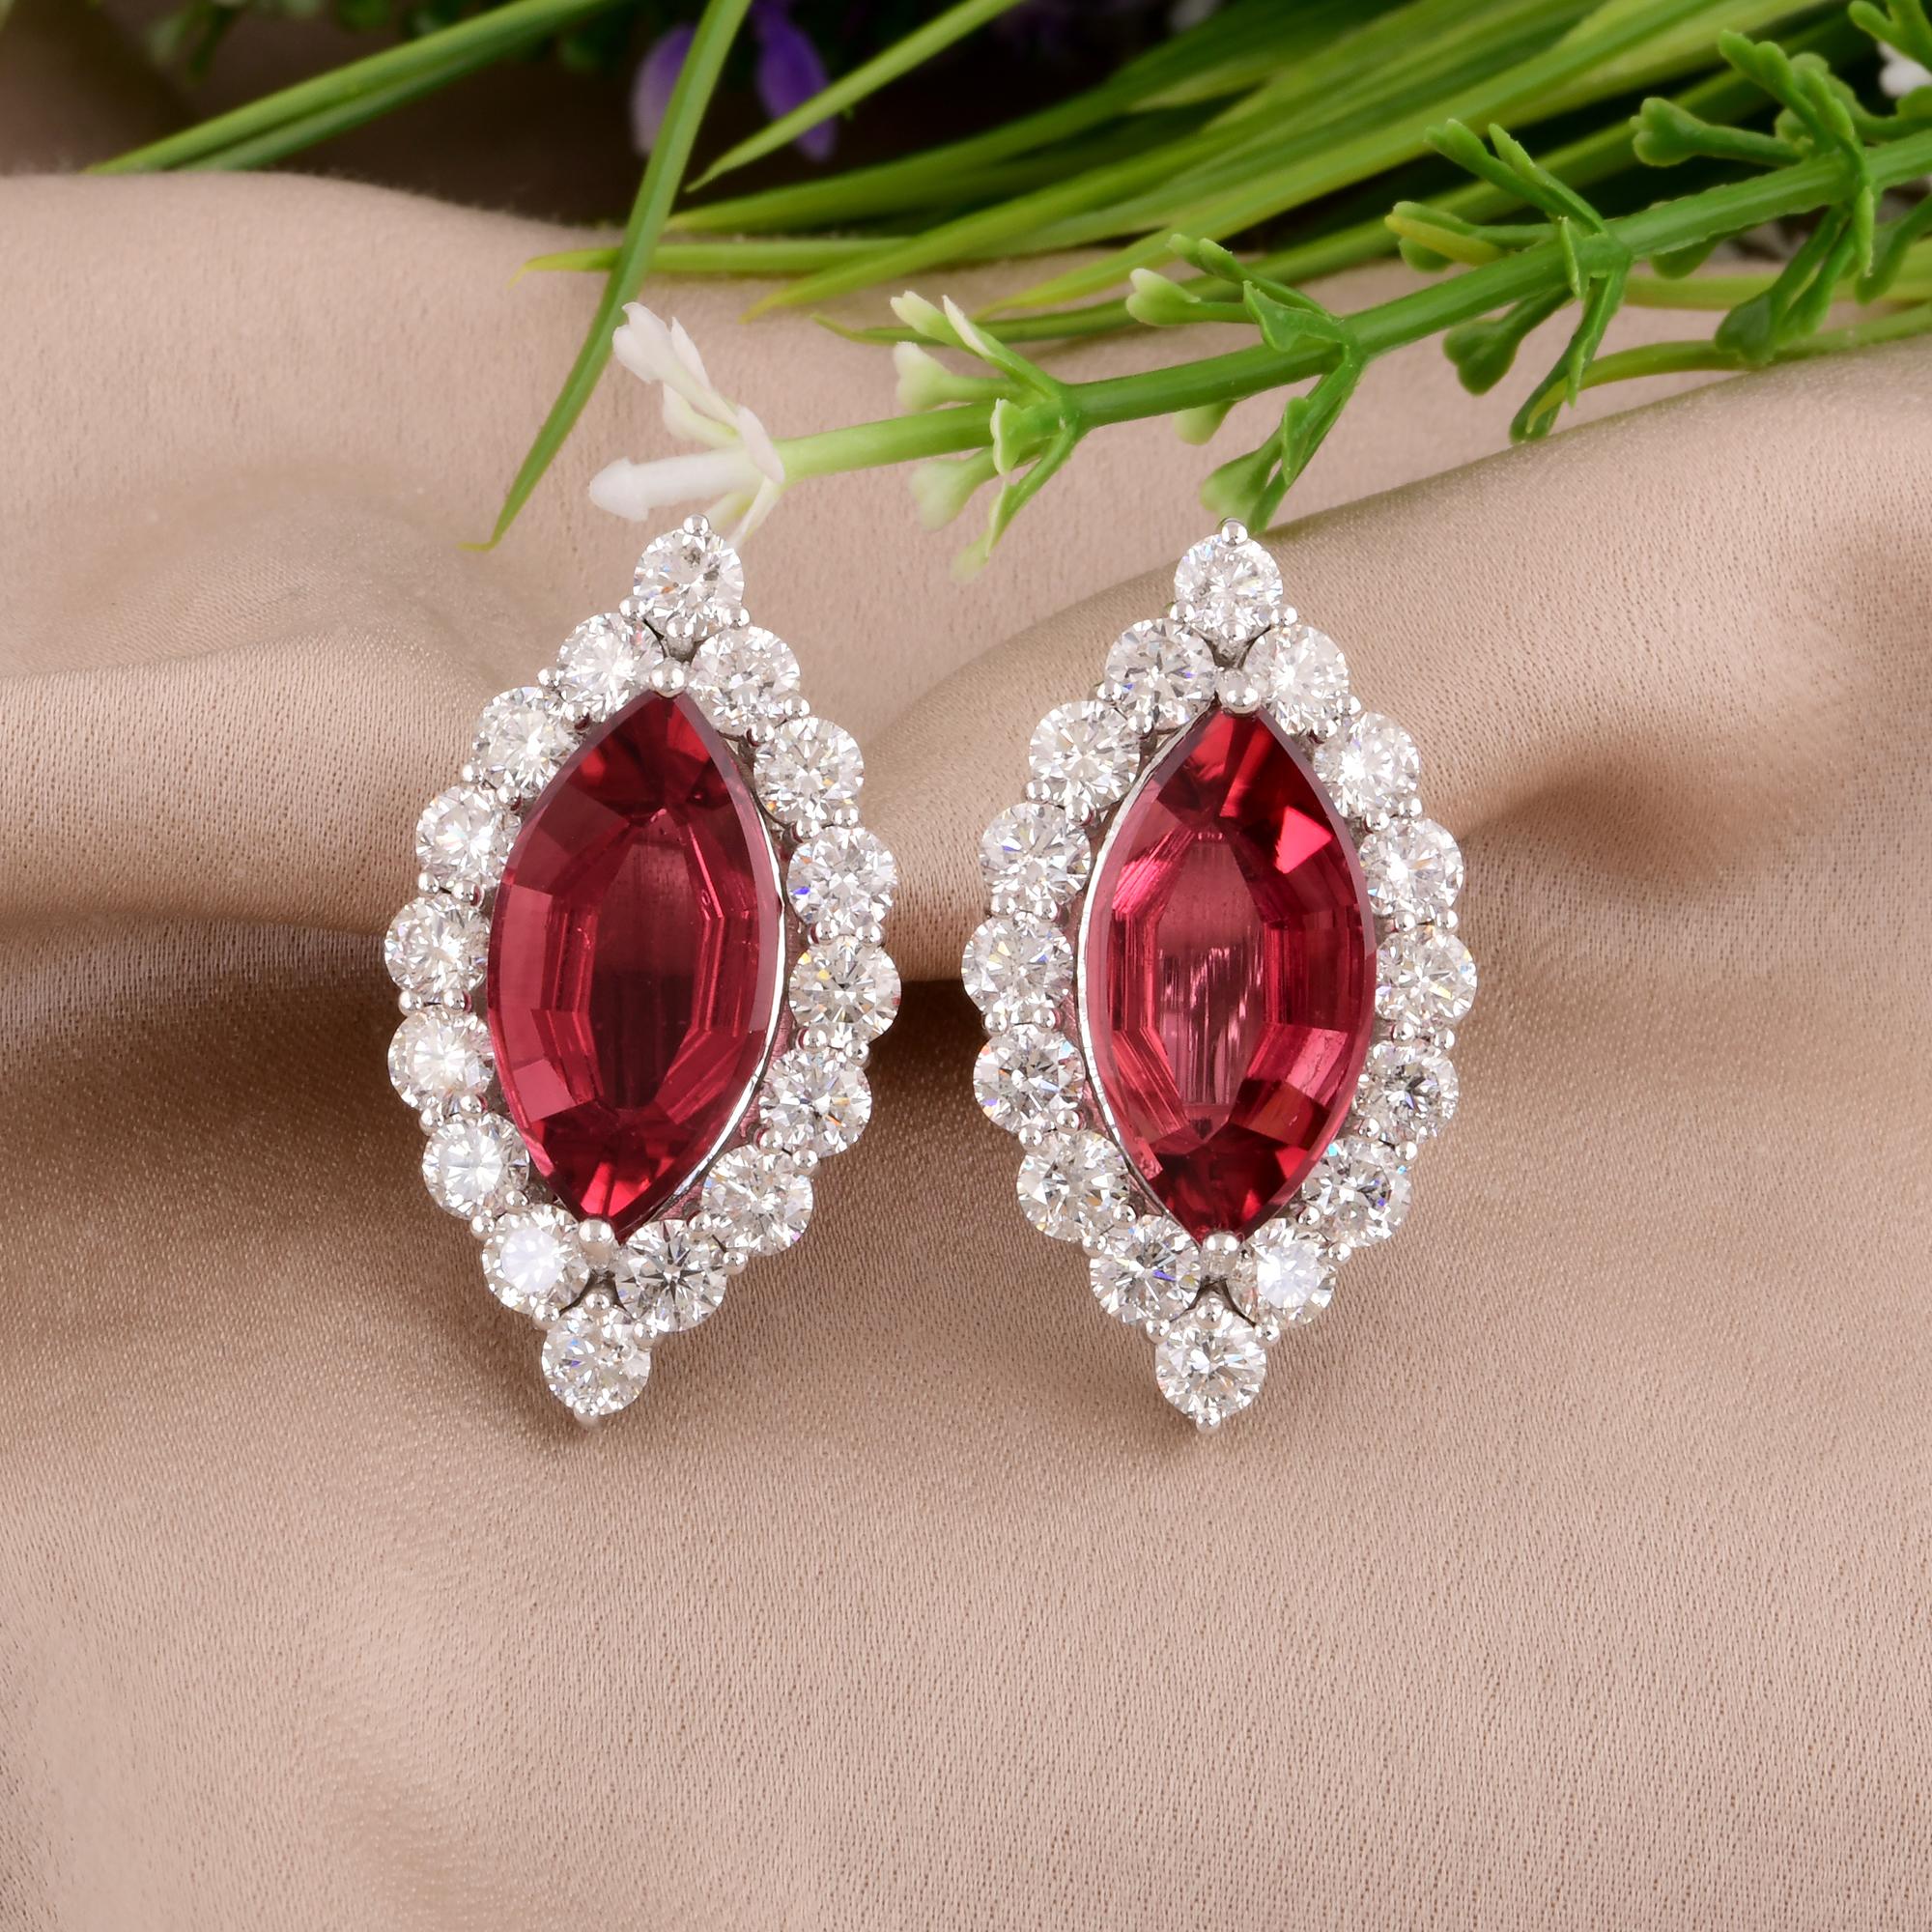 These earrings are more than just jewelry; they are a statement of sophistication and refined taste. Each earring features a lustrous, genuine Pink Tourmaline gemstone, meticulously selected for its vibrant hue and captivating brilliance. The Pink